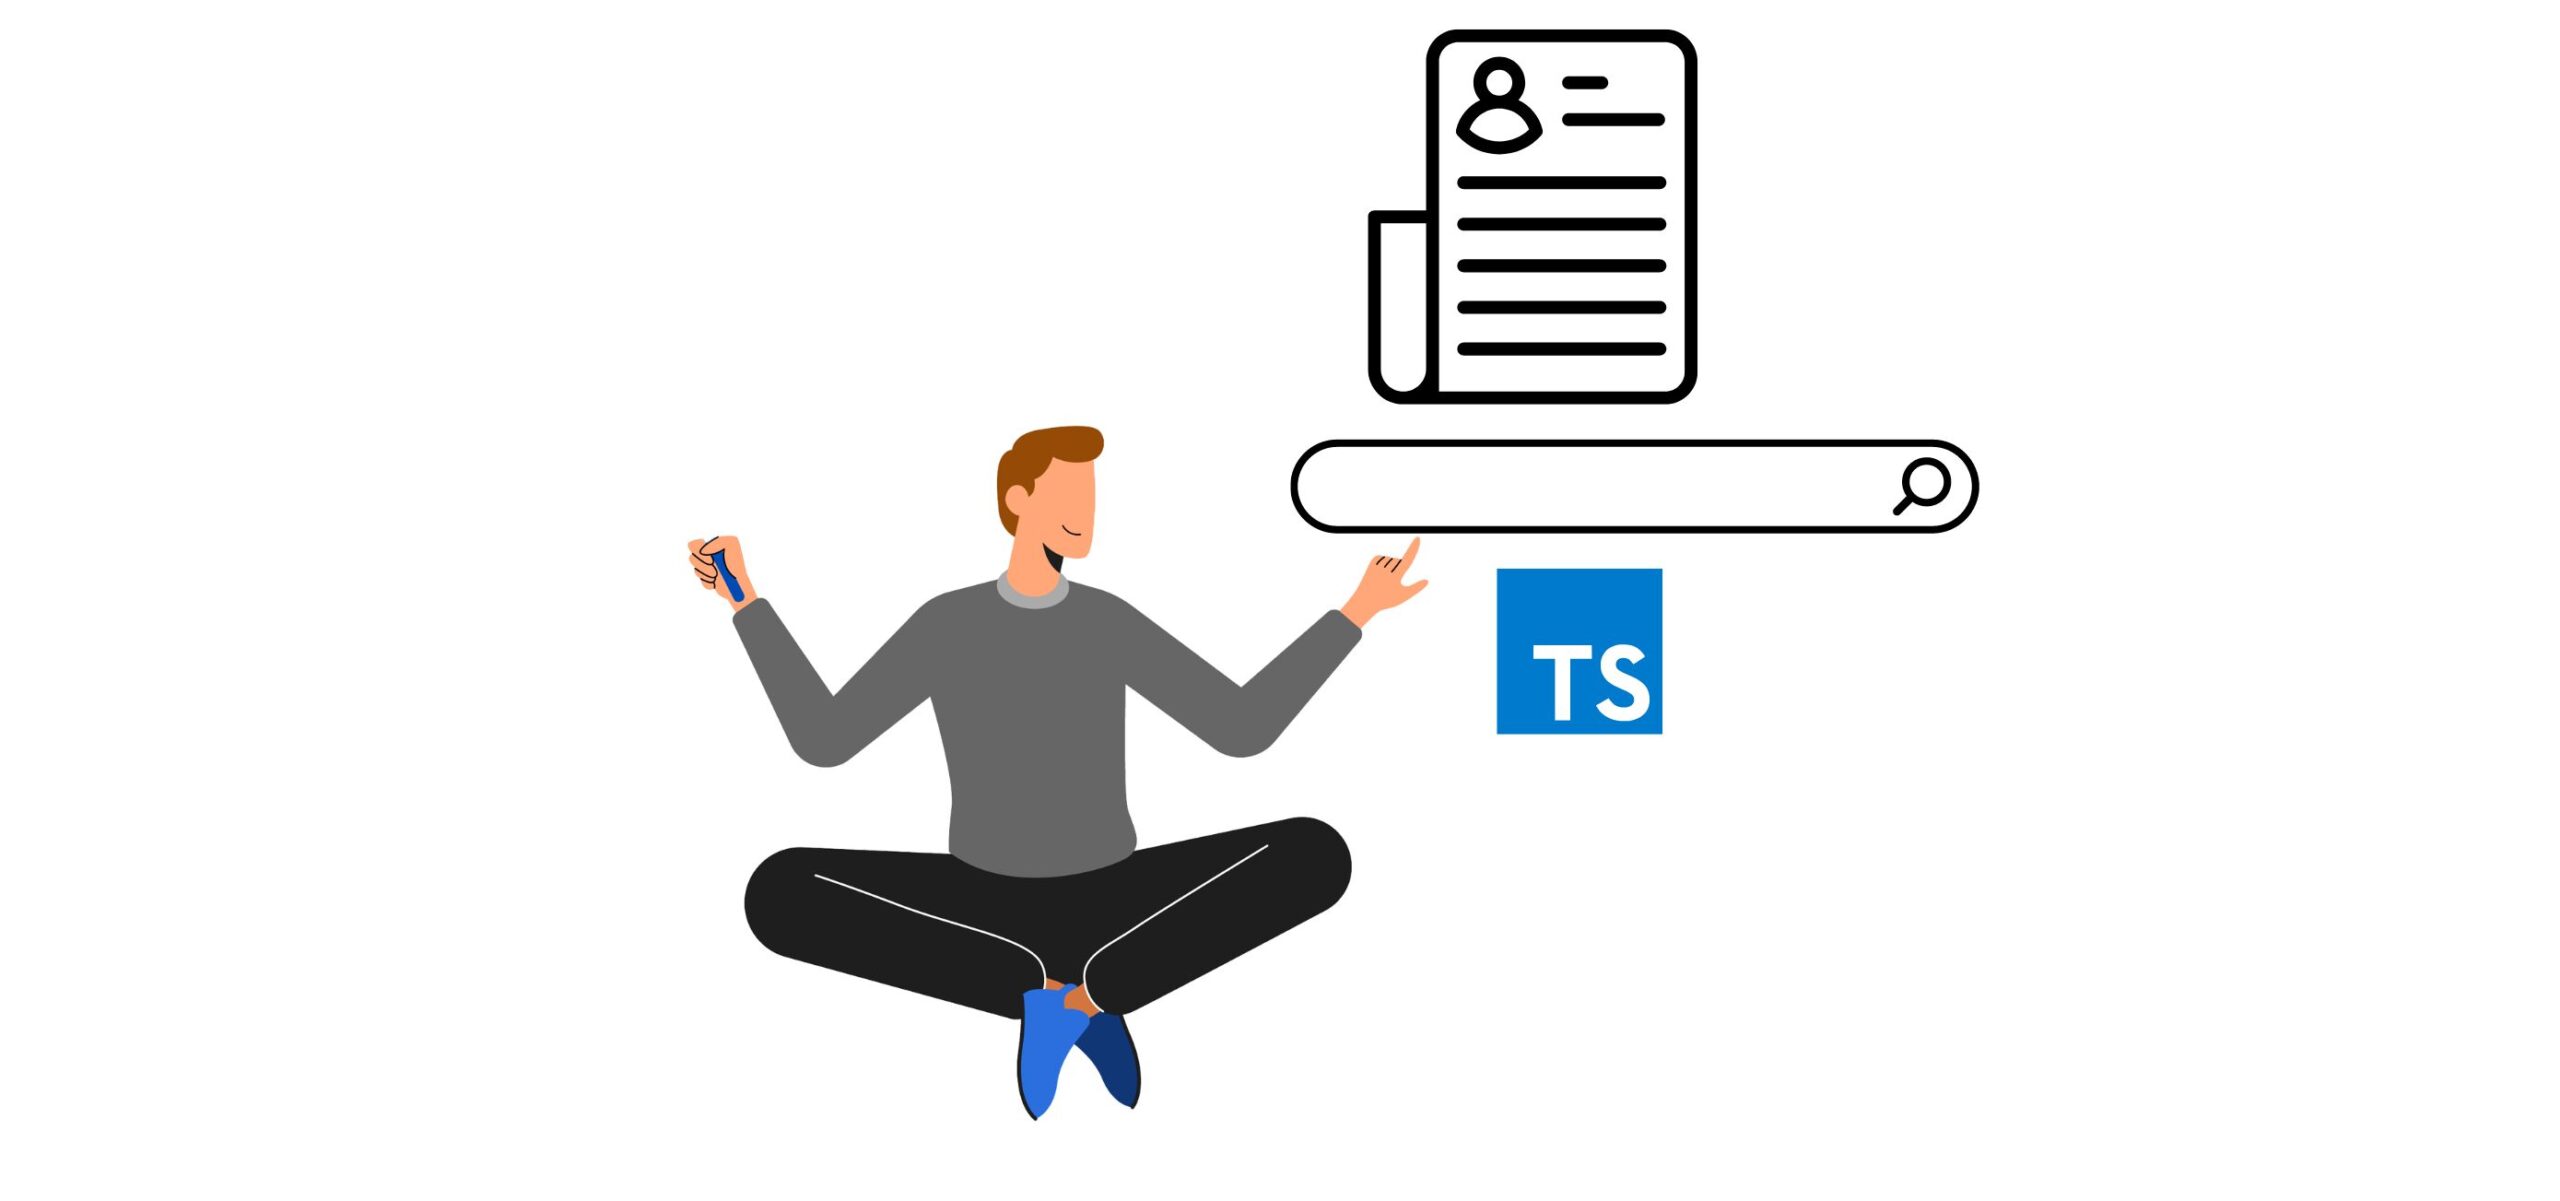 20 Most Popular TypeScript Interview Questions and Answers